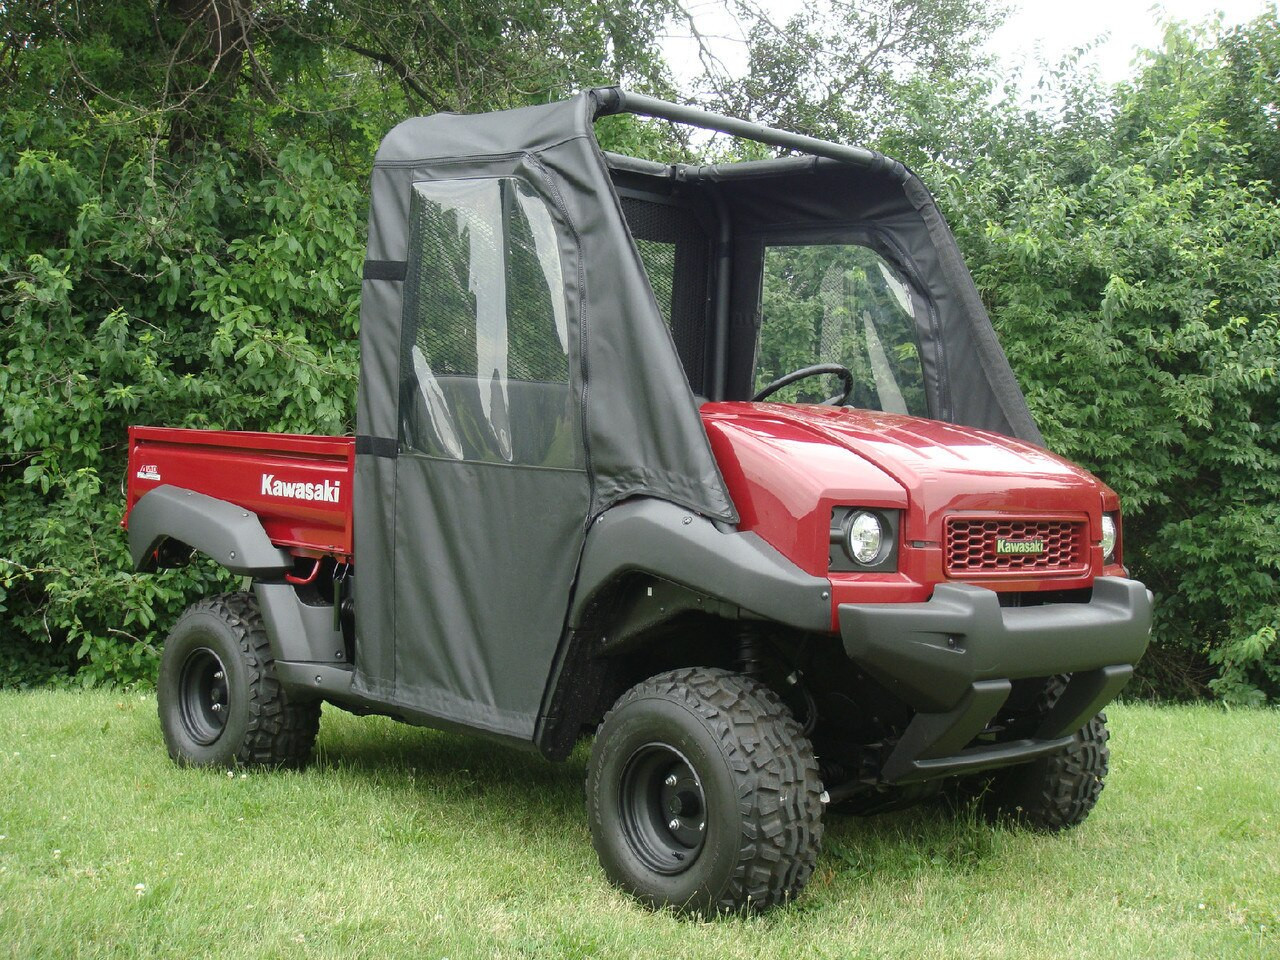 3 Star side x side Kawasaki Mule 4000/4010 doors side and front angle view